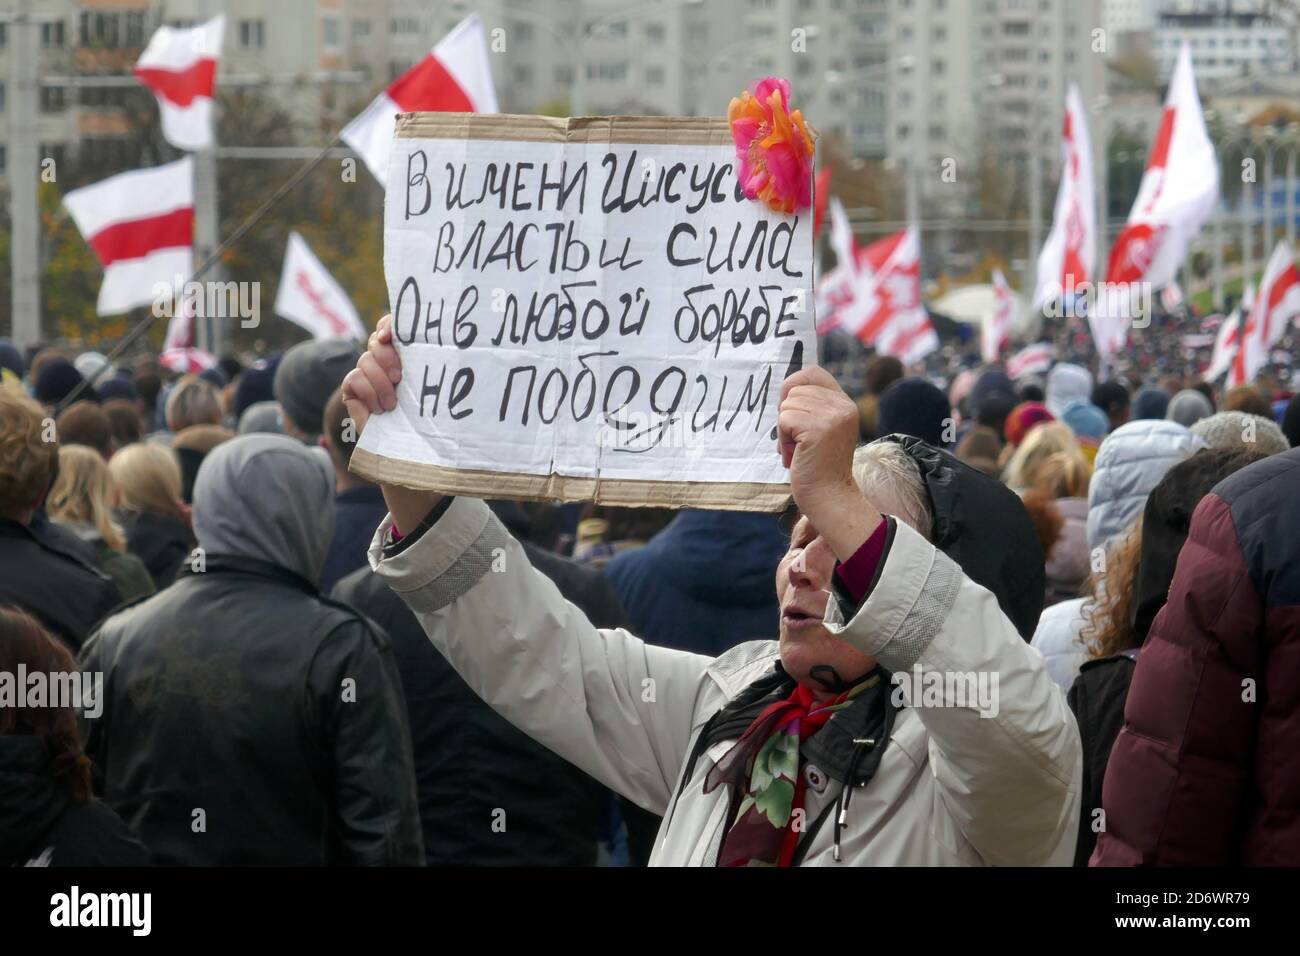 Minsk, Belarus - October 18, 2020. Old woman holding a poster. Peaceful demonstration against government violence and electoral fraud in Belarus. Stock Photo